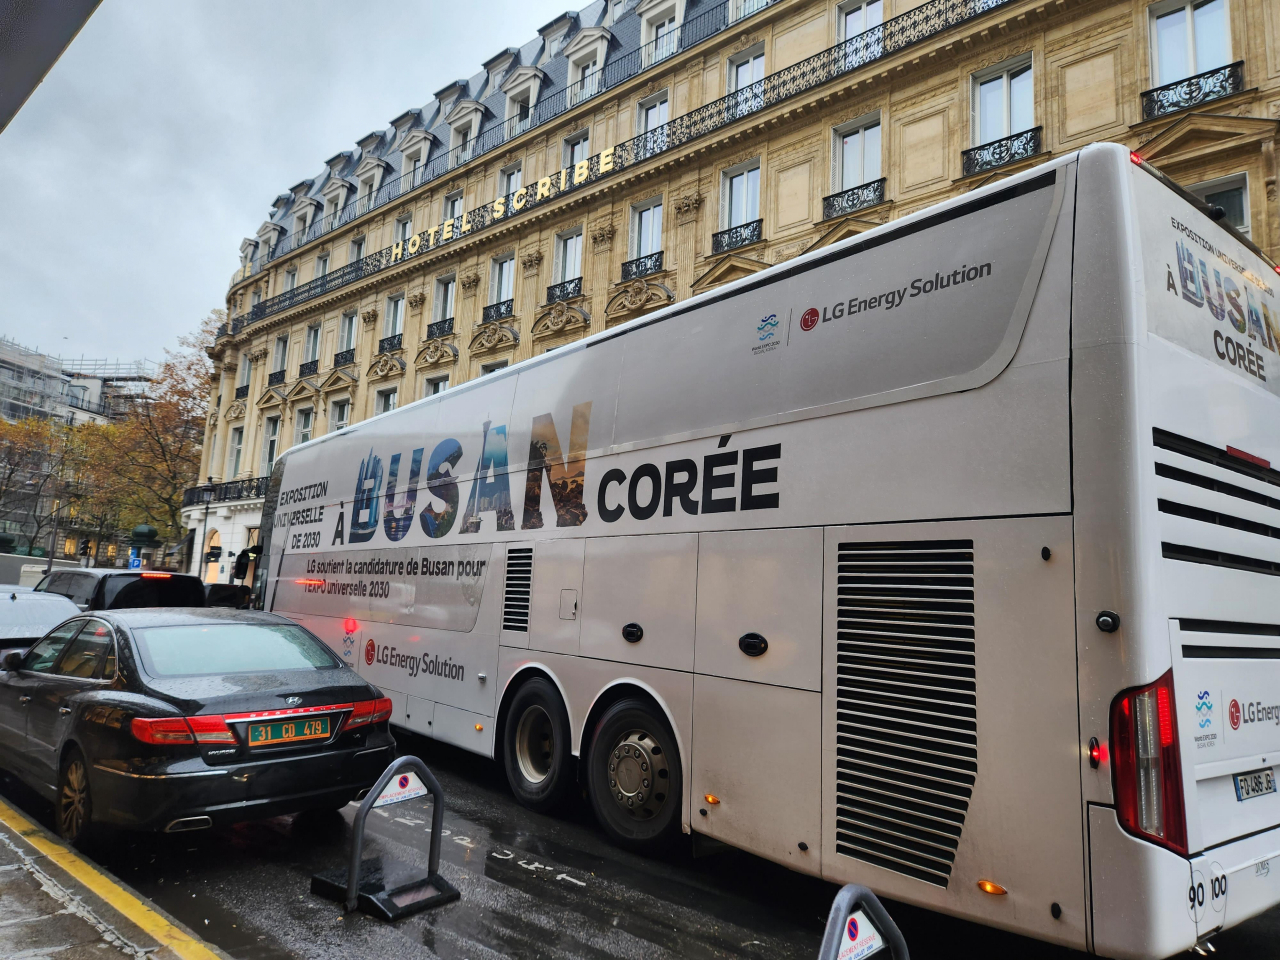 LG Energy Solution's bus advertisement on a Paris street promoting Busan's bid to host the 2030 World Expo, Monday (Yonhap)